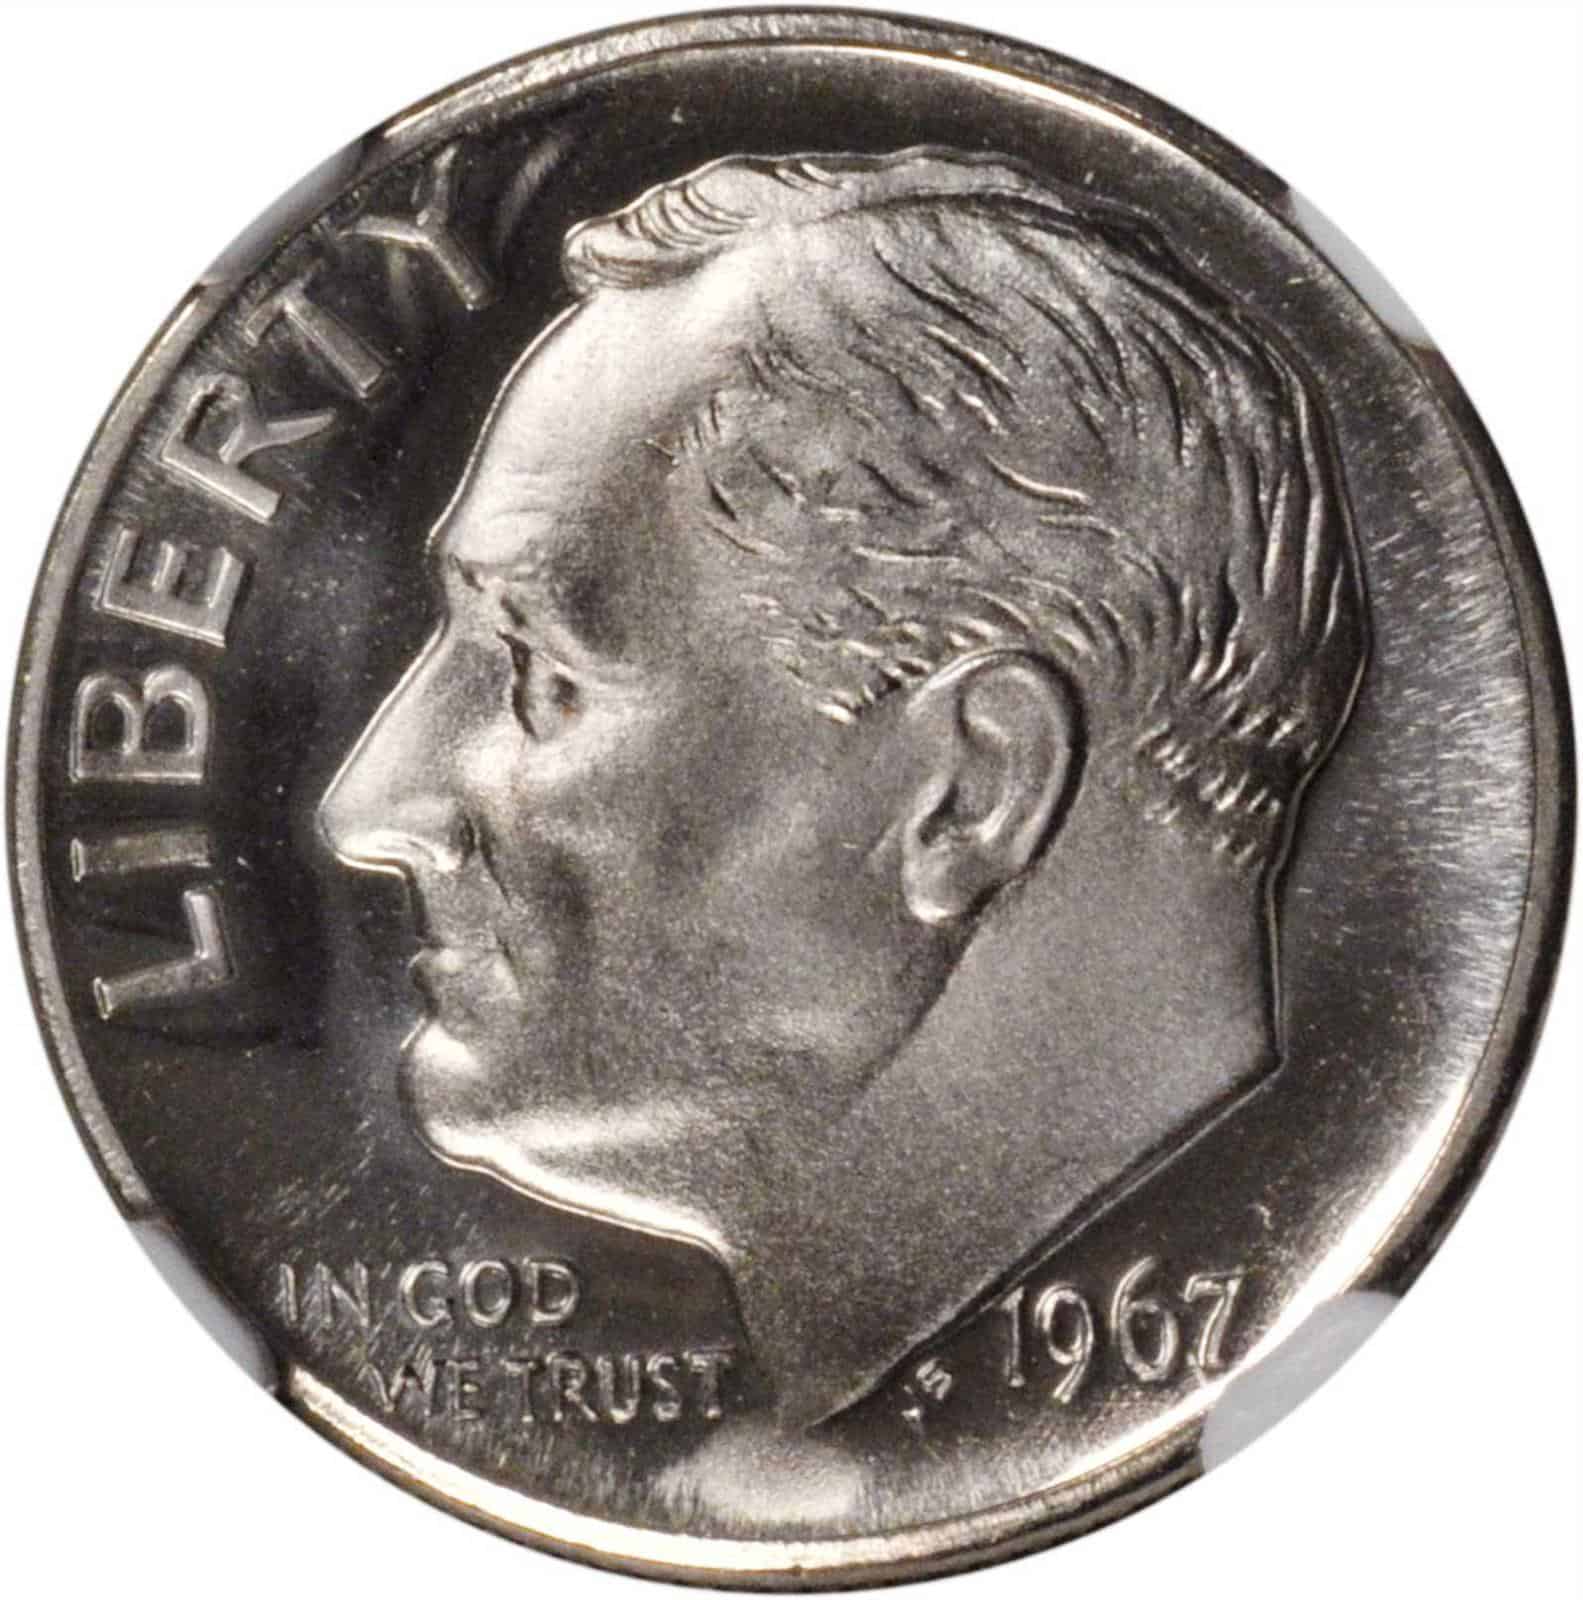 The Obverse of 1967 Dime